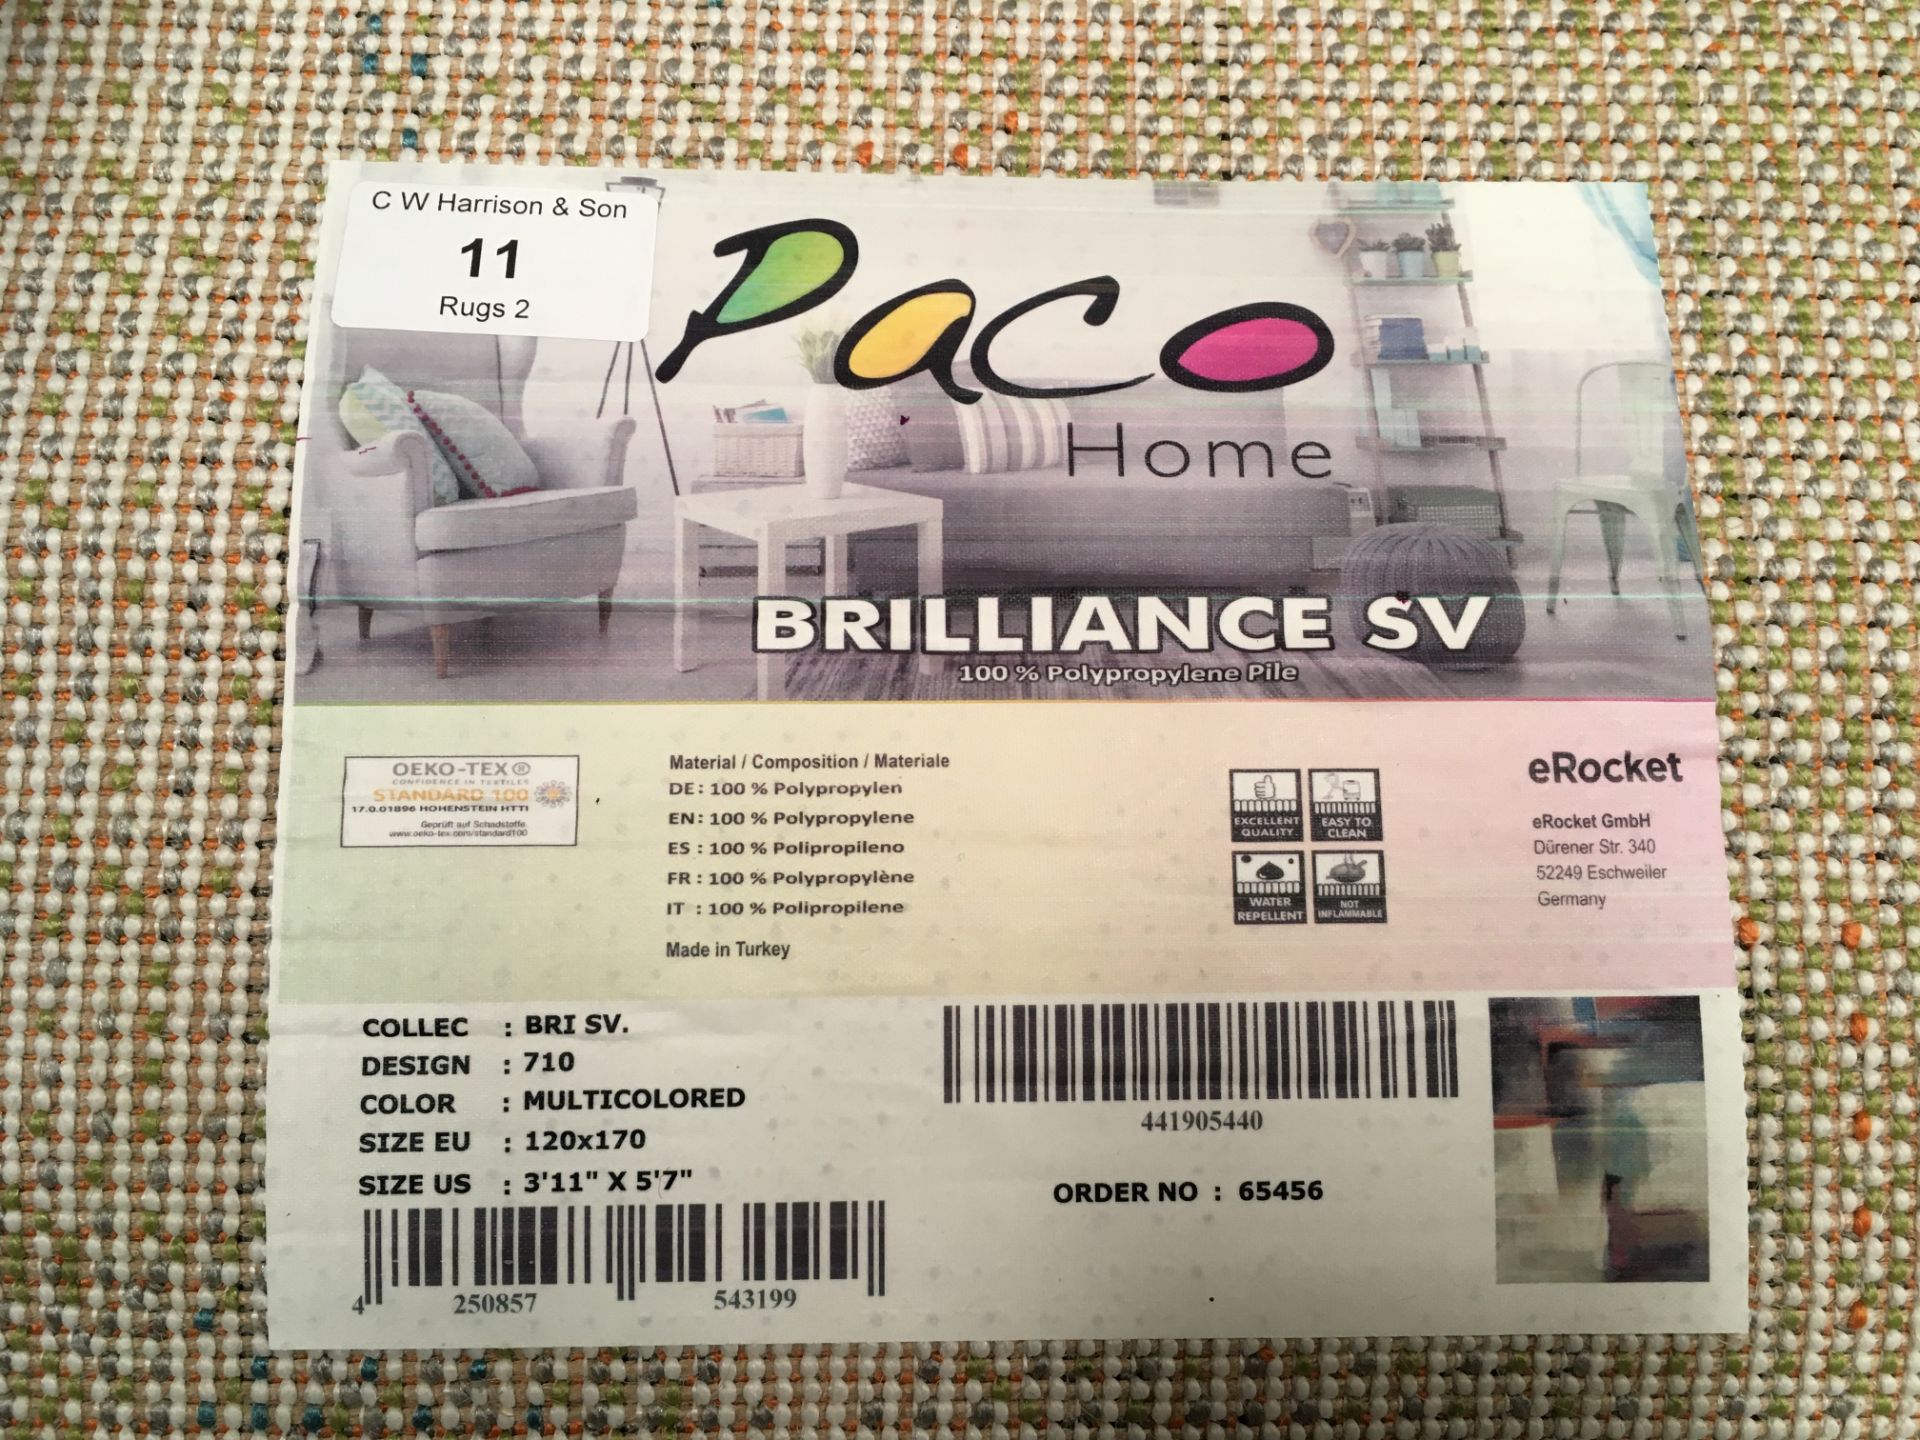 A Paco Home Brilliance SV 710 multicoloured rug - 120cm x 170cm - Image 2 of 2